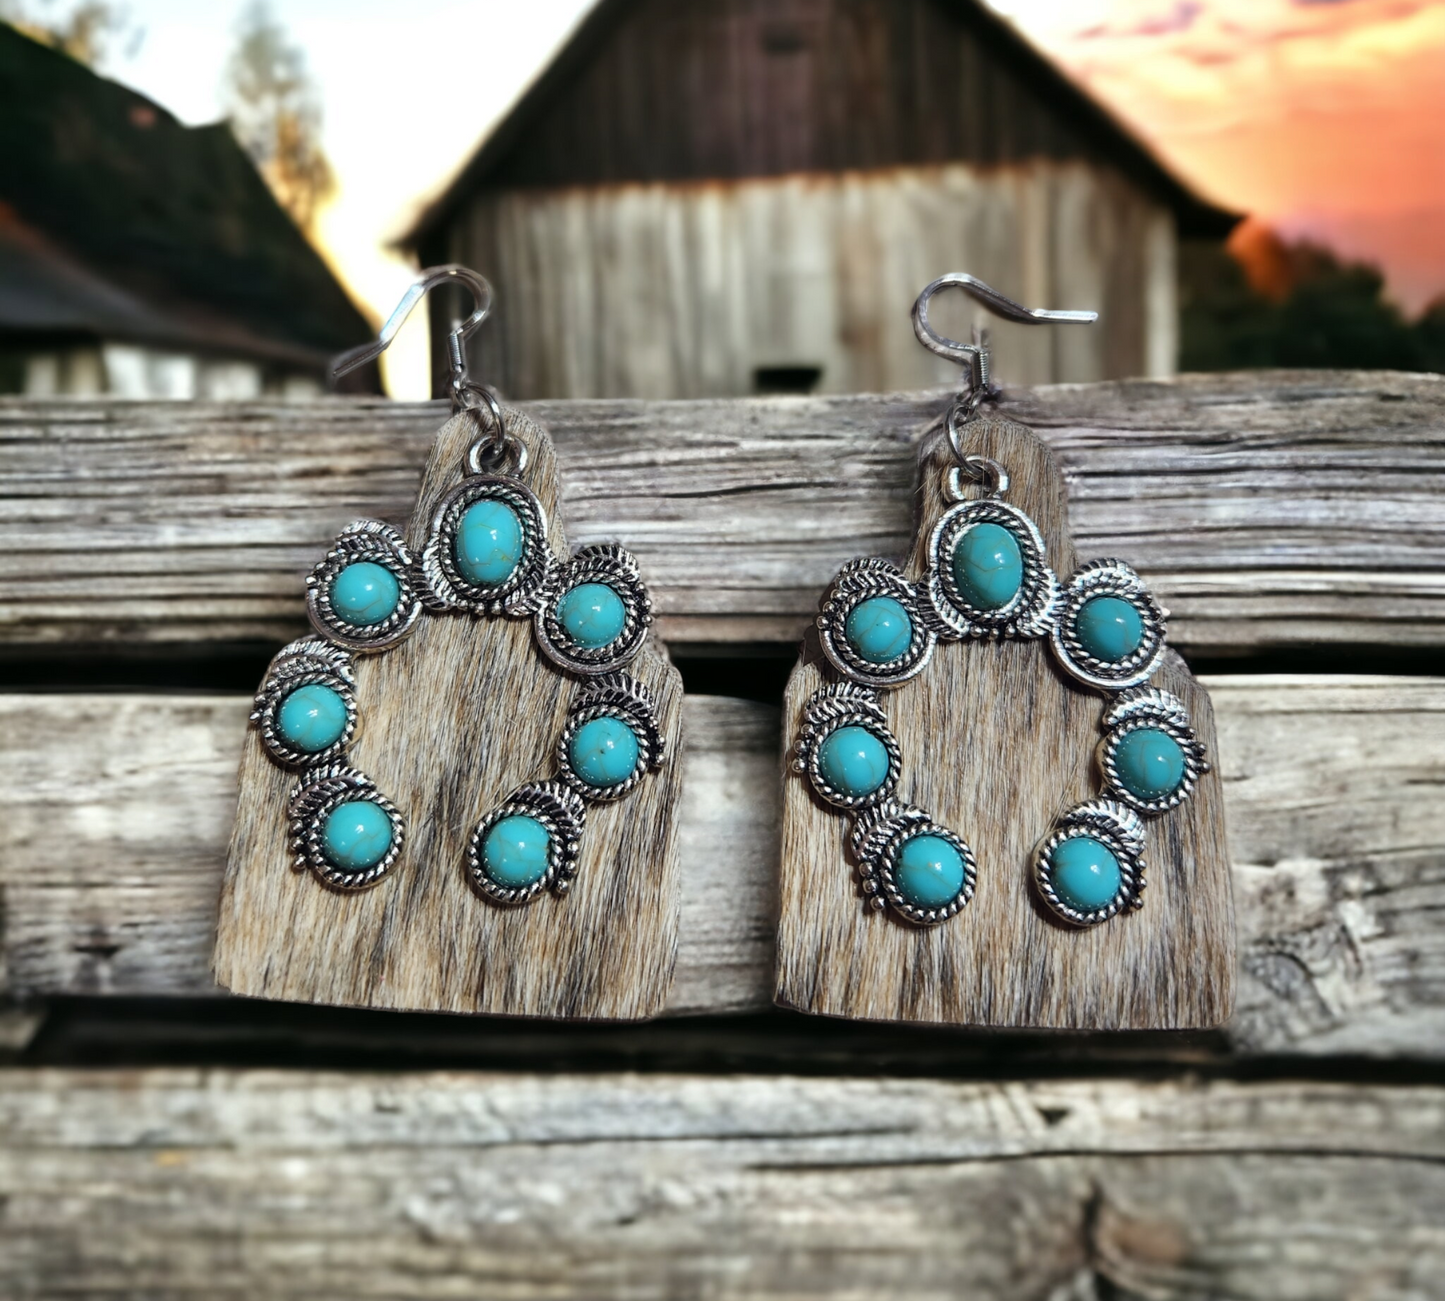 Hair on Leather Cow Tag with Turquoise Charm